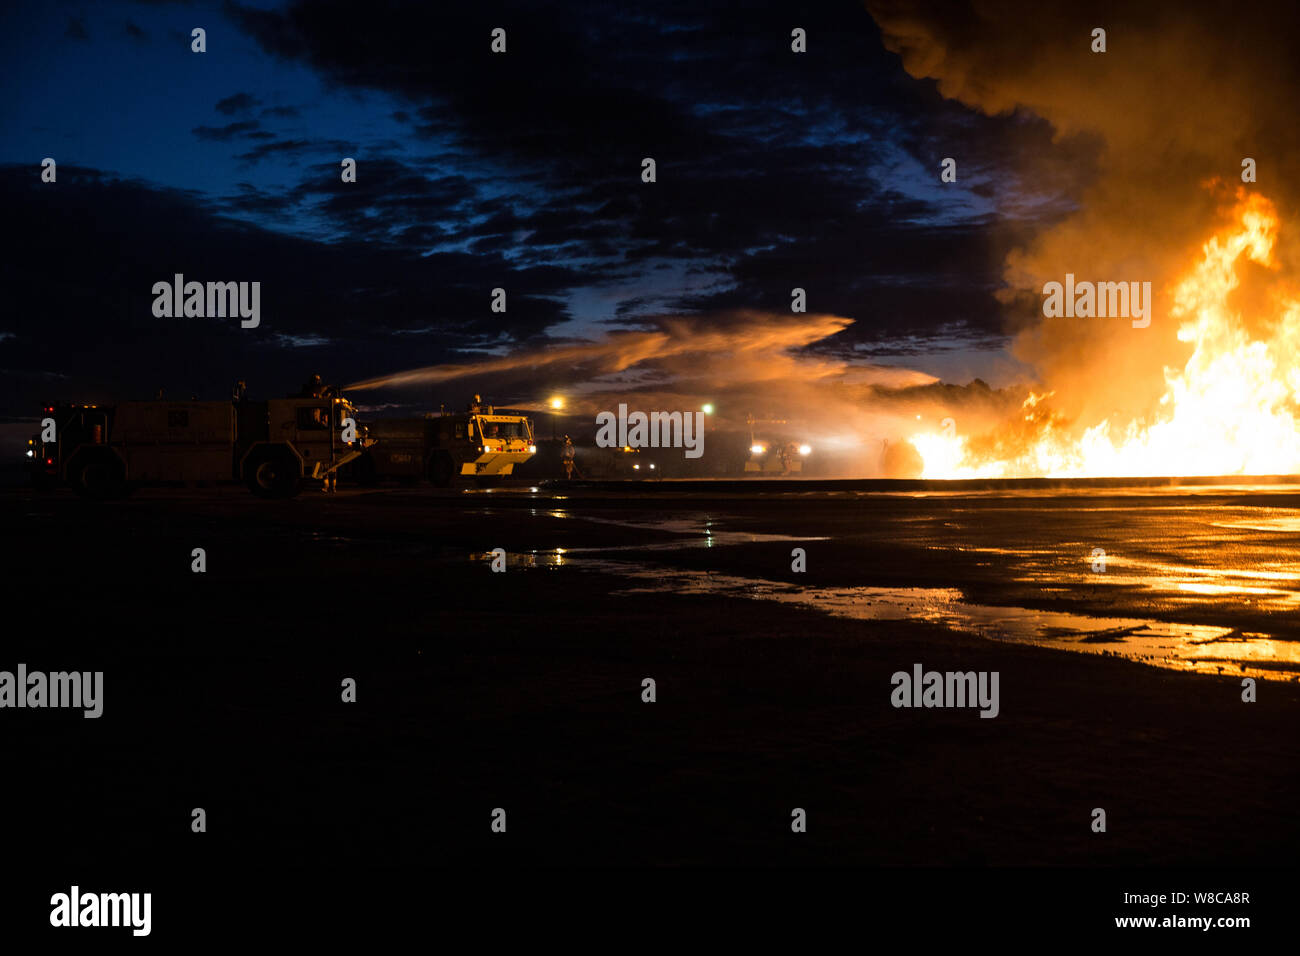 U.S. Marines with Aircraft Rescue and Firefighting (ARFF), assigned to Headquarters and Headquarters Squadron, conduct a controlled fuel burn drill at Marine Corps Air Station Cherry Point, North Carolina, July 31, 2019. The training exercise replicated the kind of fires they may encounter in the line of duty and helped familiarize the Marines with the vehicles, gear, and rescue equipment needed to safely and efficiently extinguish fuel fires. The ARFF Marines used hand-line attacks as well as P-19 fire trucks to contain the flames. (U.S. Marine Corps photo by Lance Cpl. Michael Neuenhoff). Stock Photo